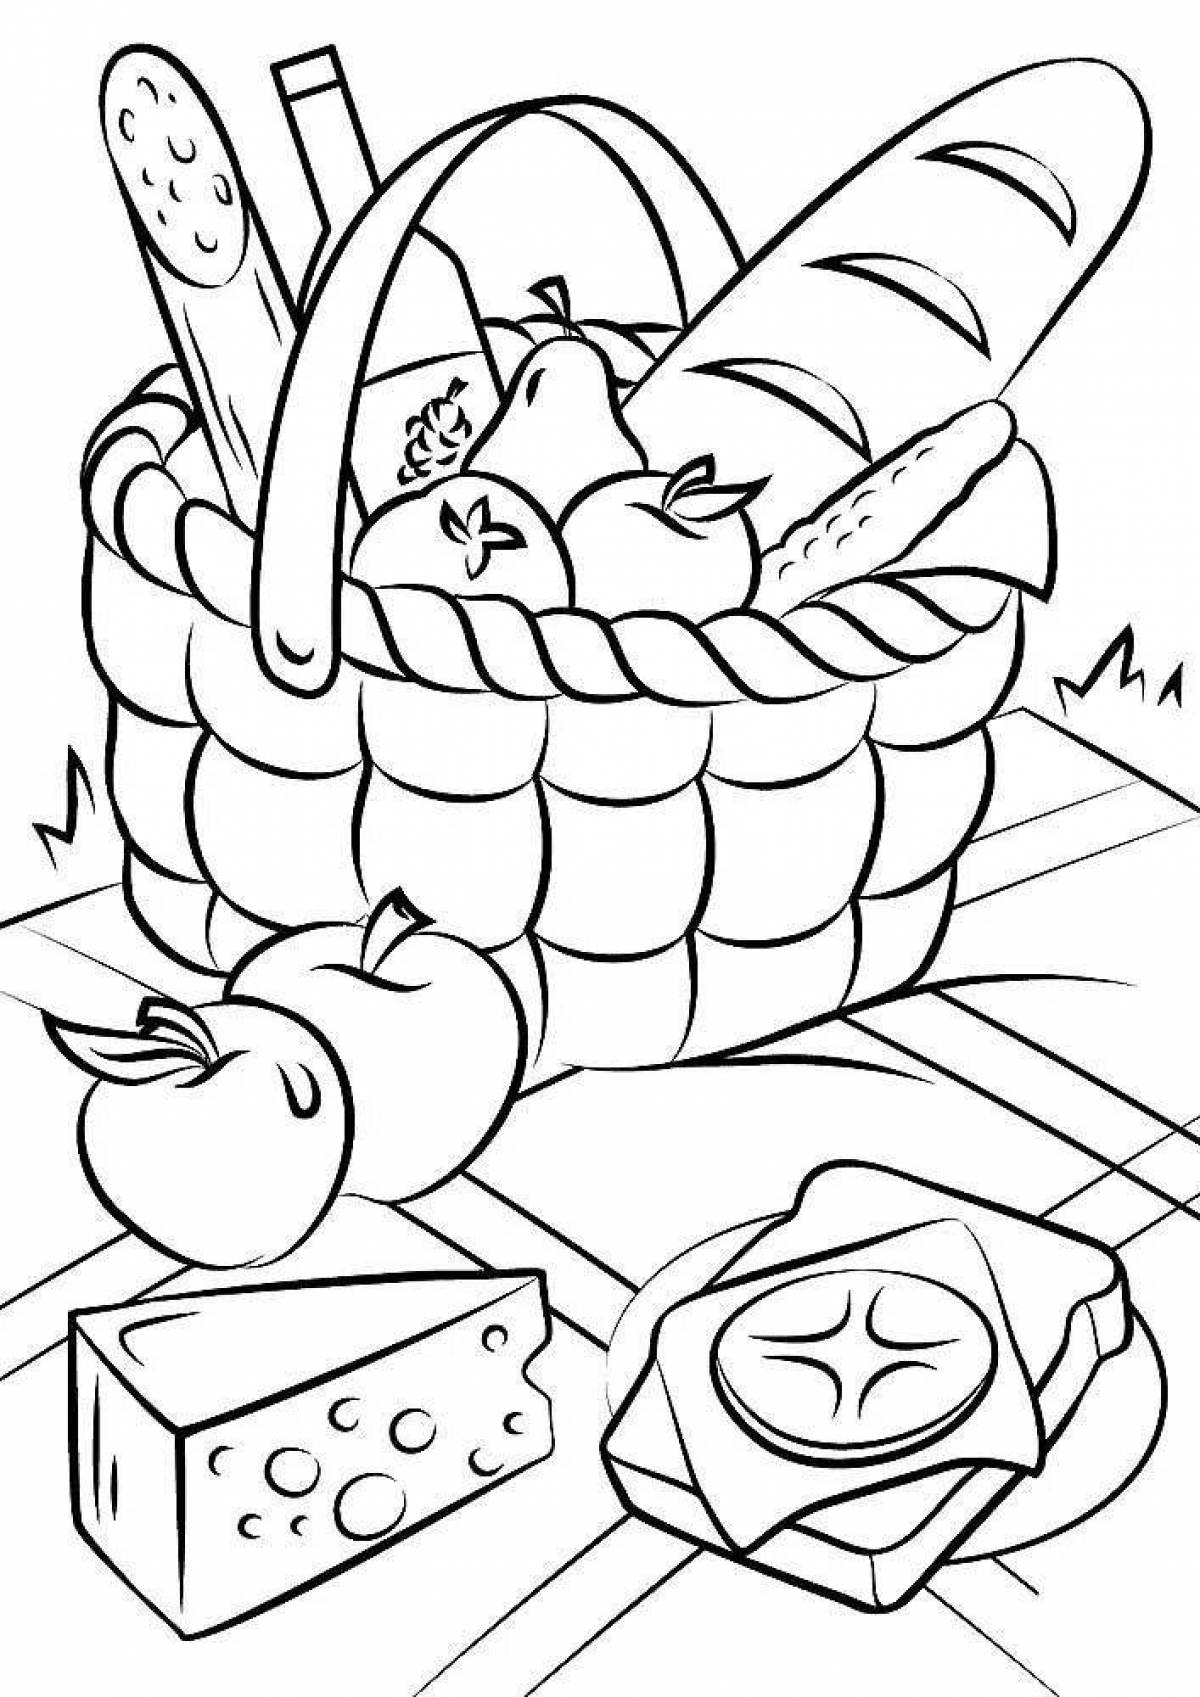 Magic grocery cart coloring page